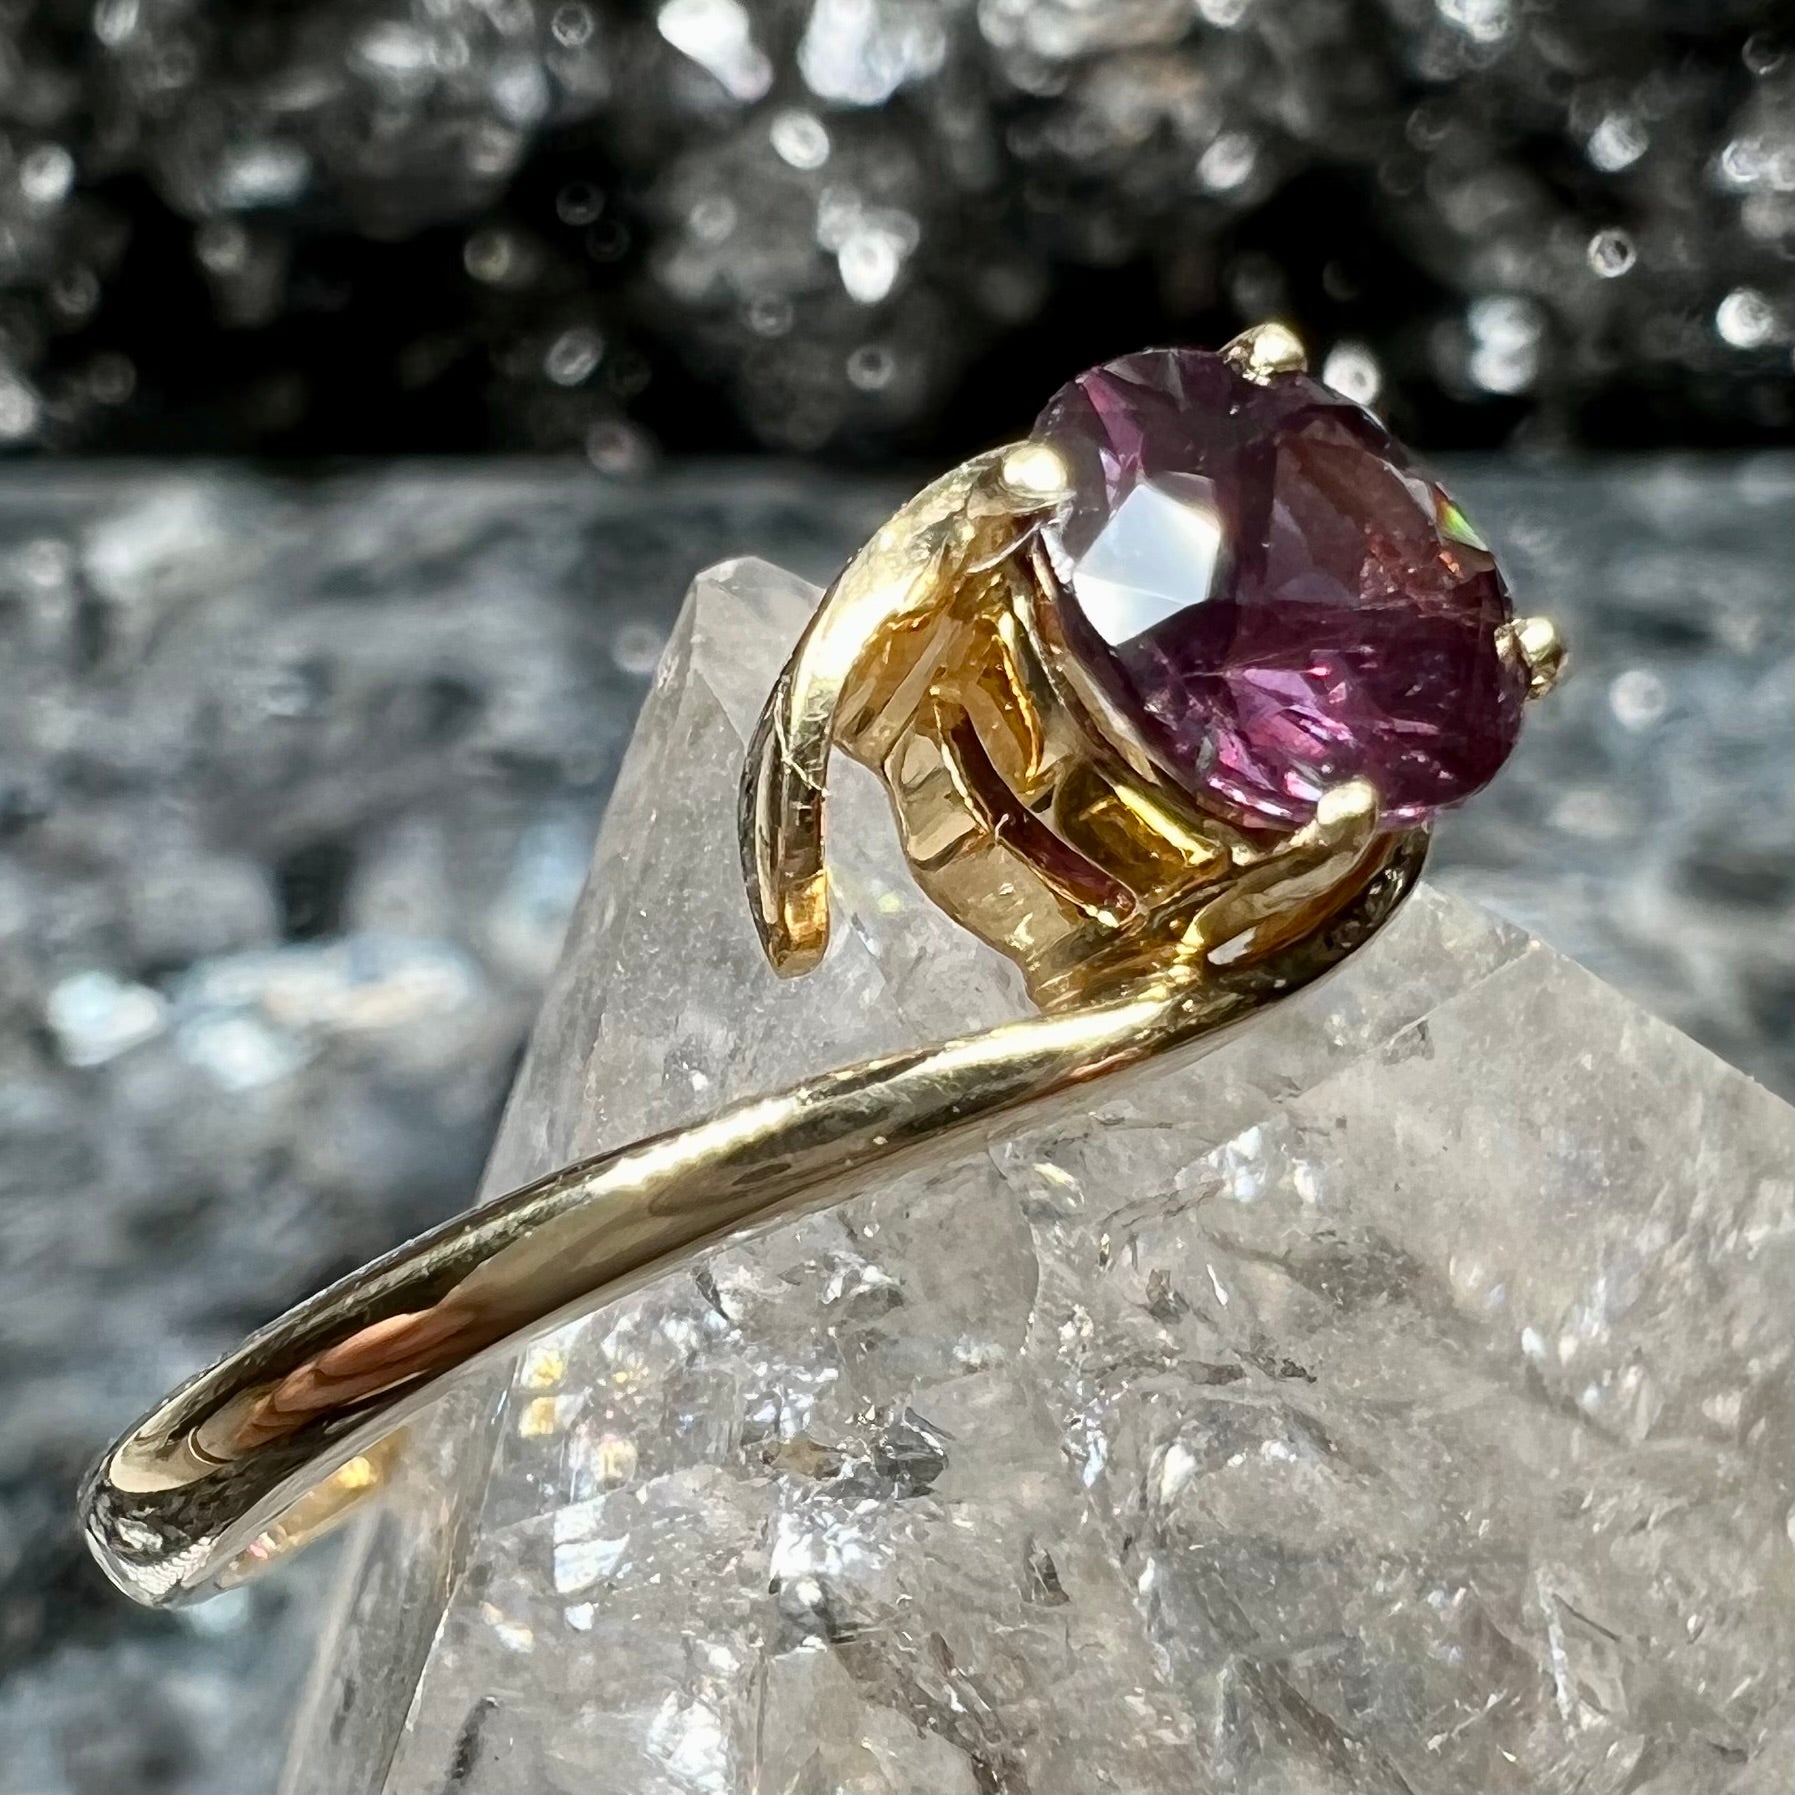 A yellow gold solitaire engagement ring set with a faceted oval cut color change garnet stone.